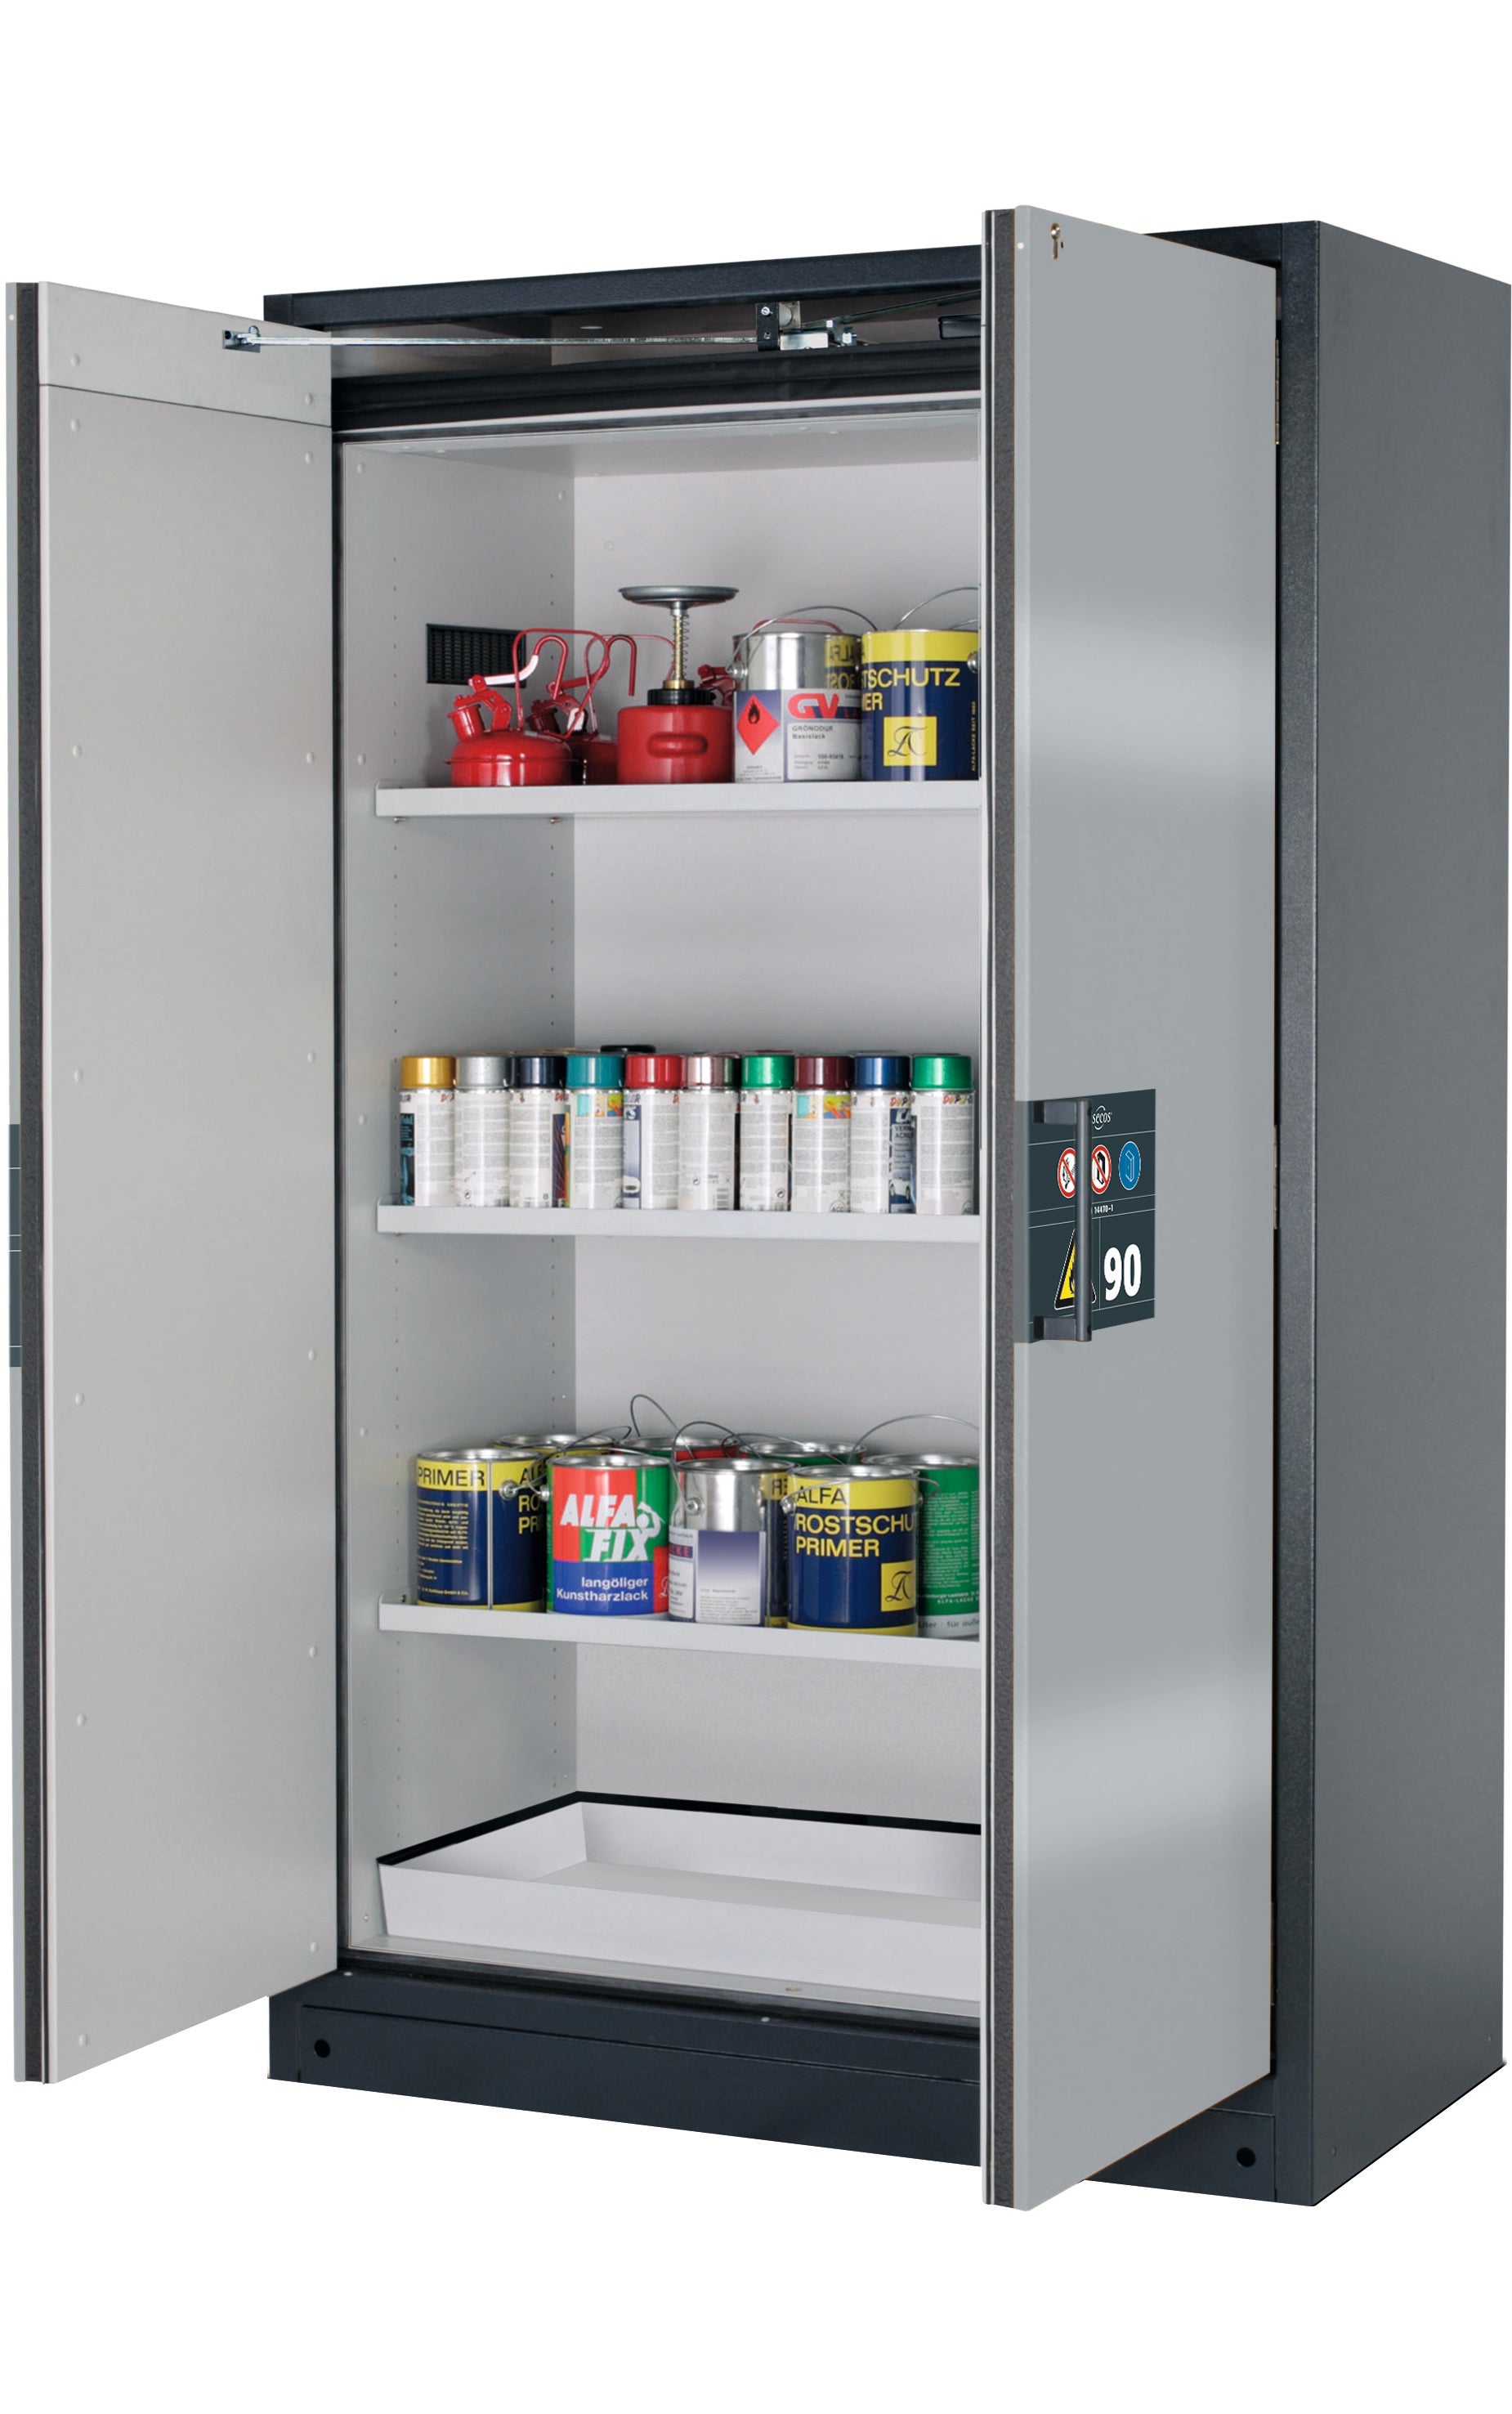 Type 90 safety storage cabinet Q-PEGASUS-90 model Q90.195.120.WDAC in asecos silver with 3x shelf standard (sheet steel),